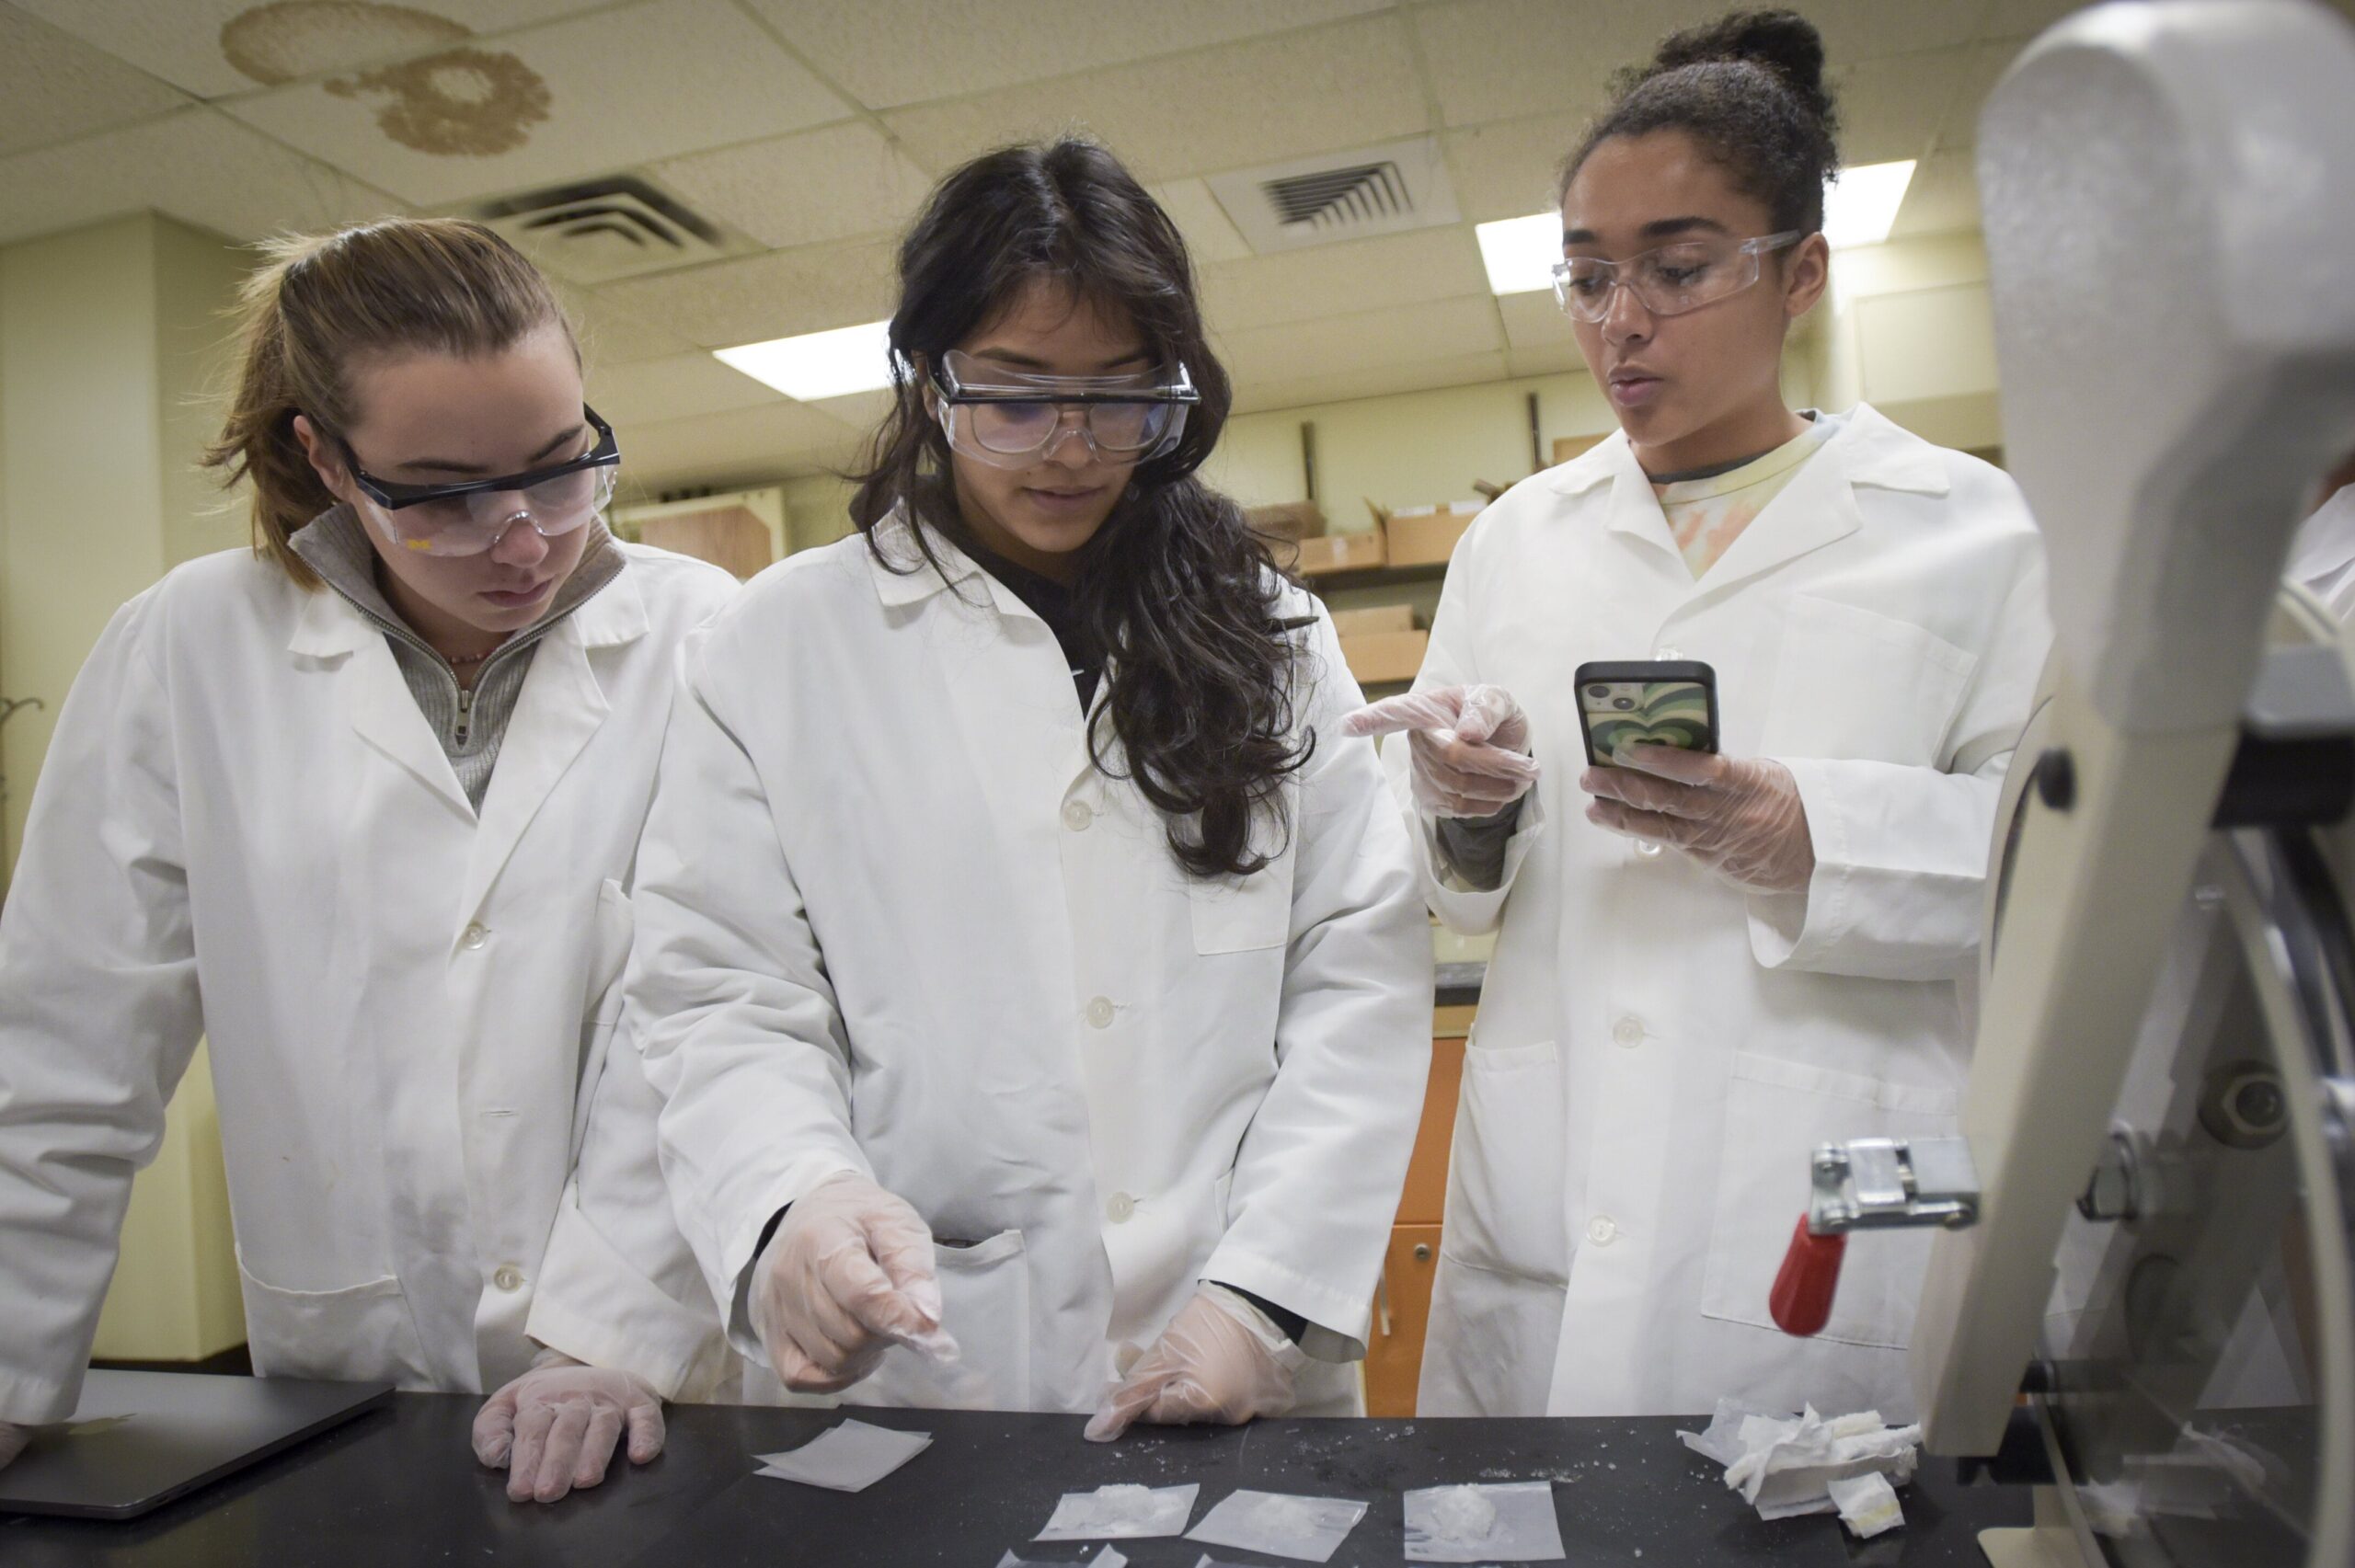 Three students in lab attire discussing results of lab experiment